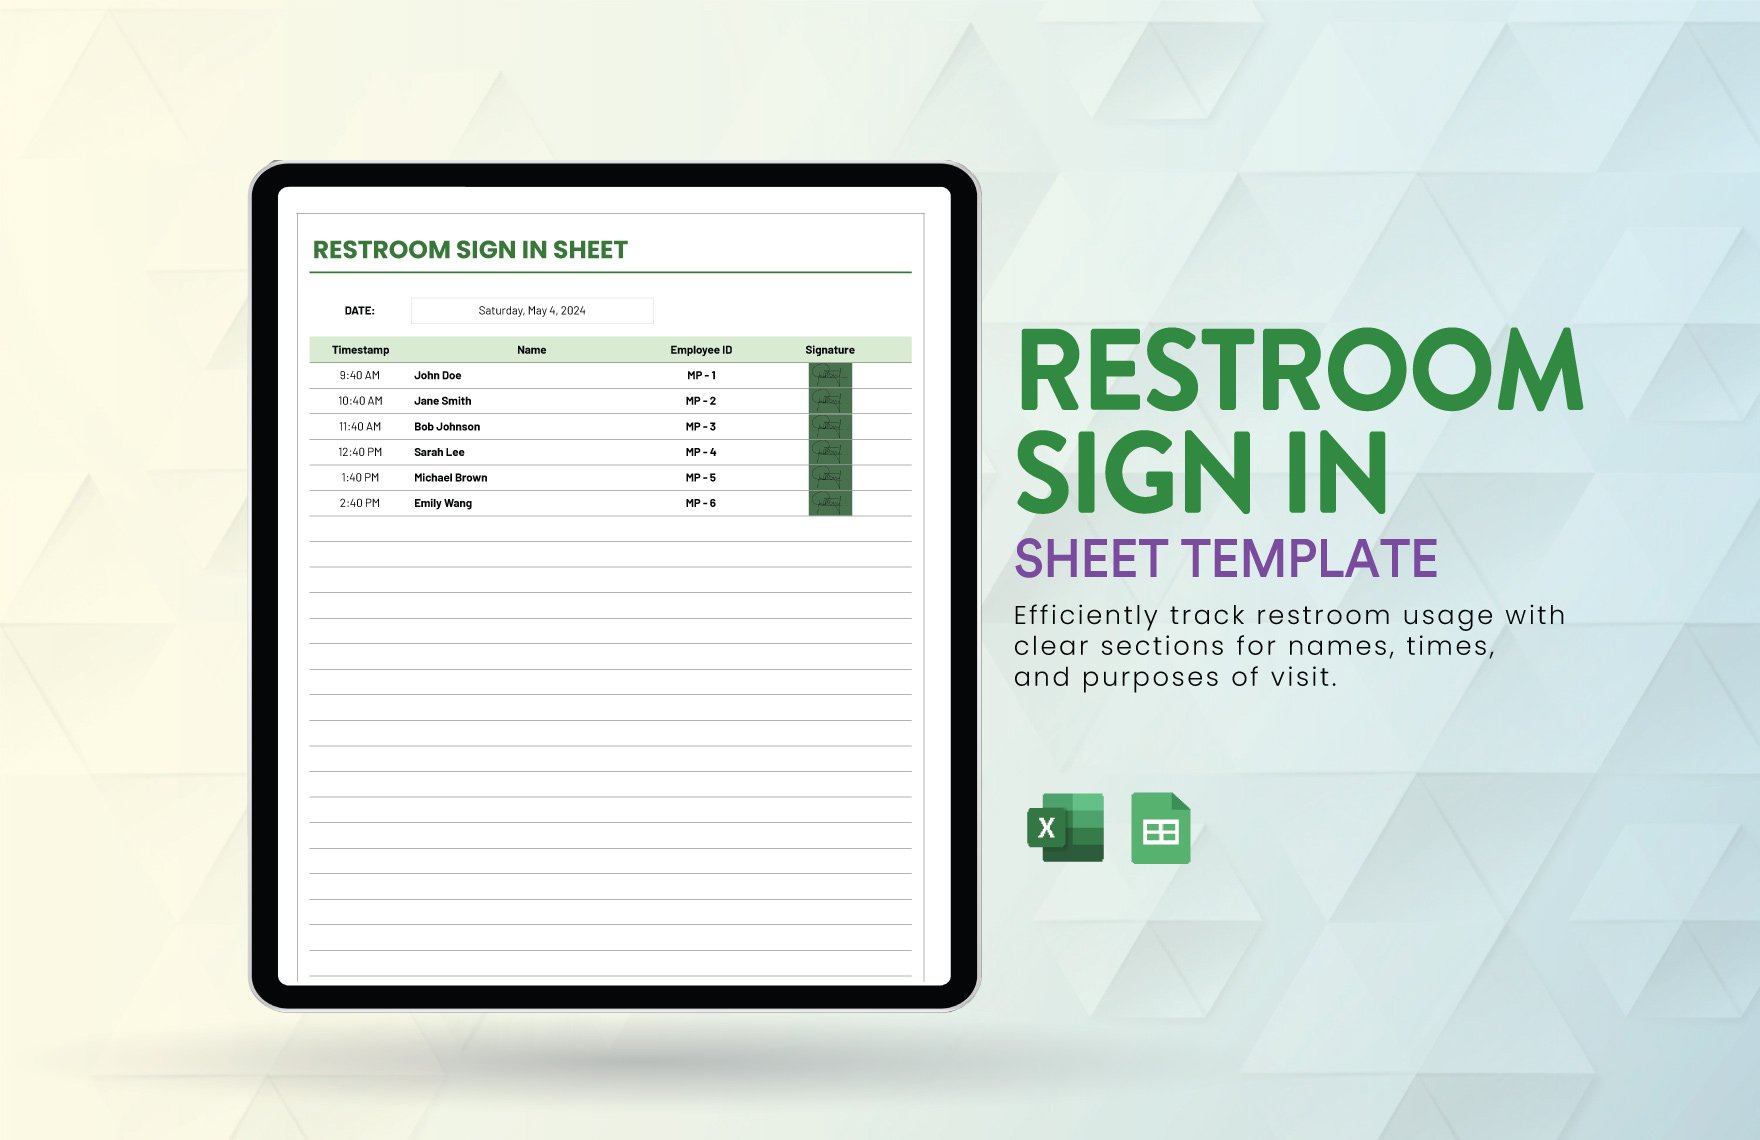 Restroom Sign in Sheet Template in Excel, Google Sheets